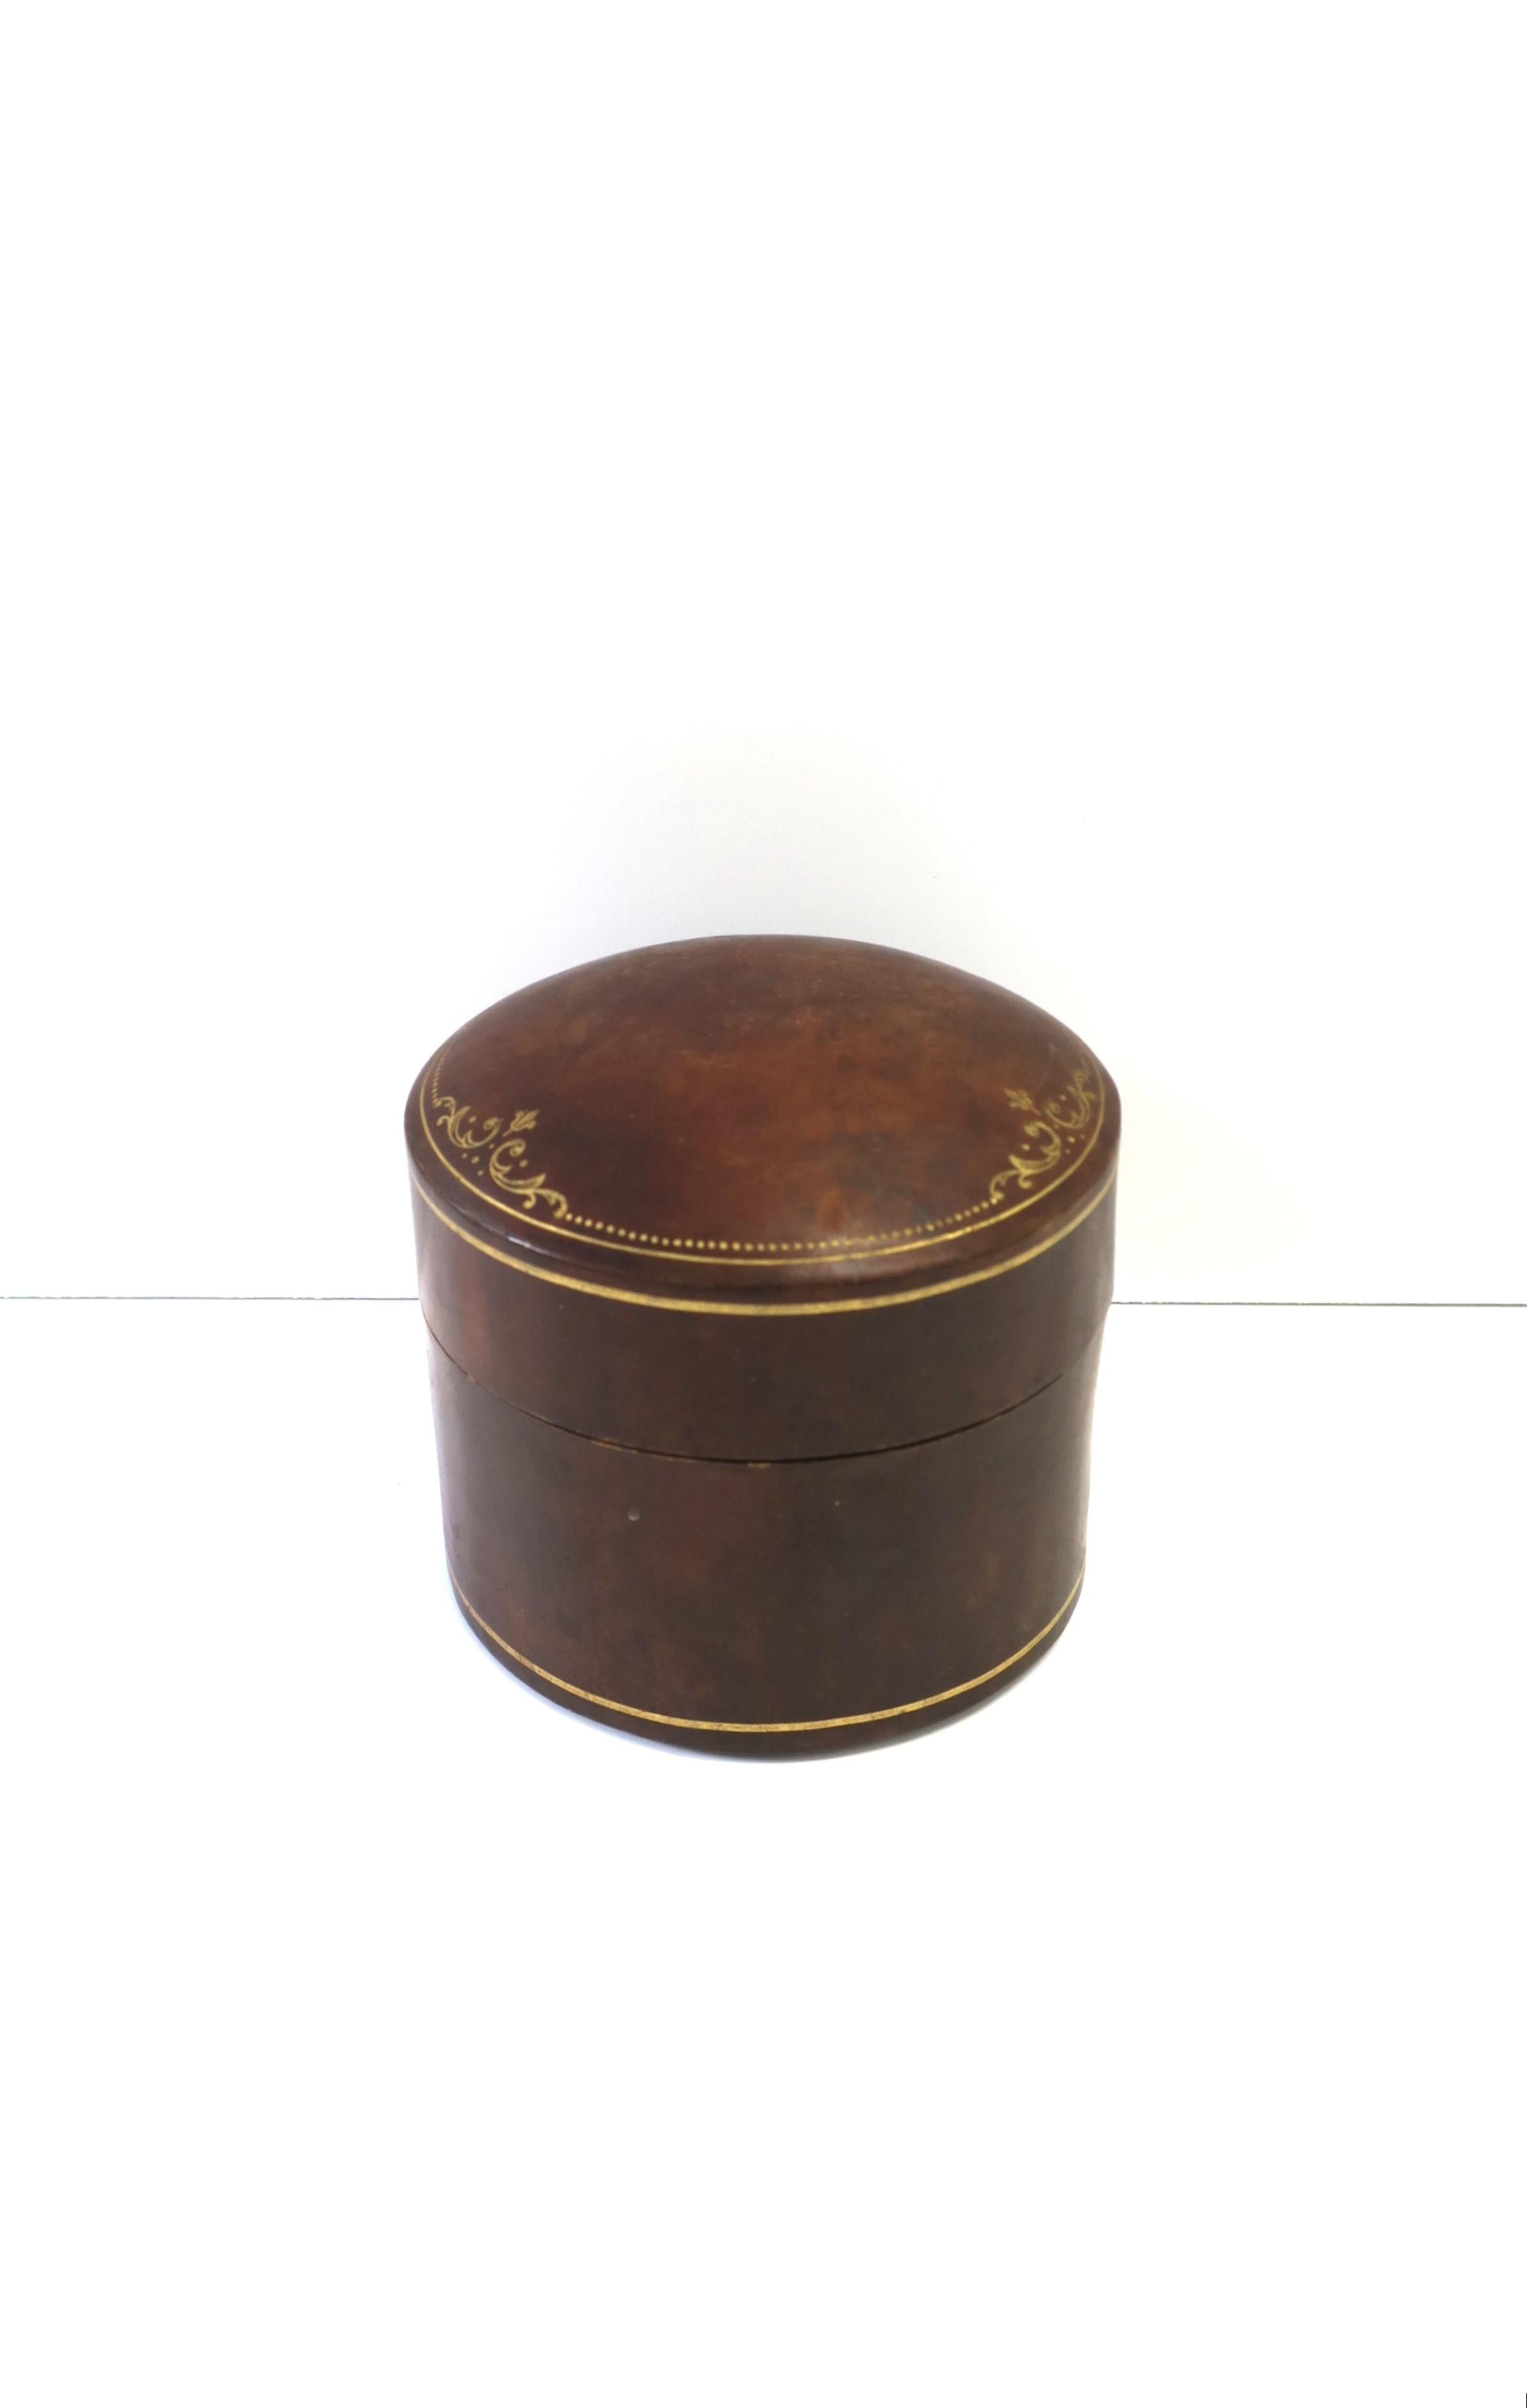 An Italian brown leather cylindrical jewelry box with gold embossing, circa mid-20th century, Italy. Box can hold jewelry or other items on a desk, vanity, walk-in-closet, etc. Dimensions: 4